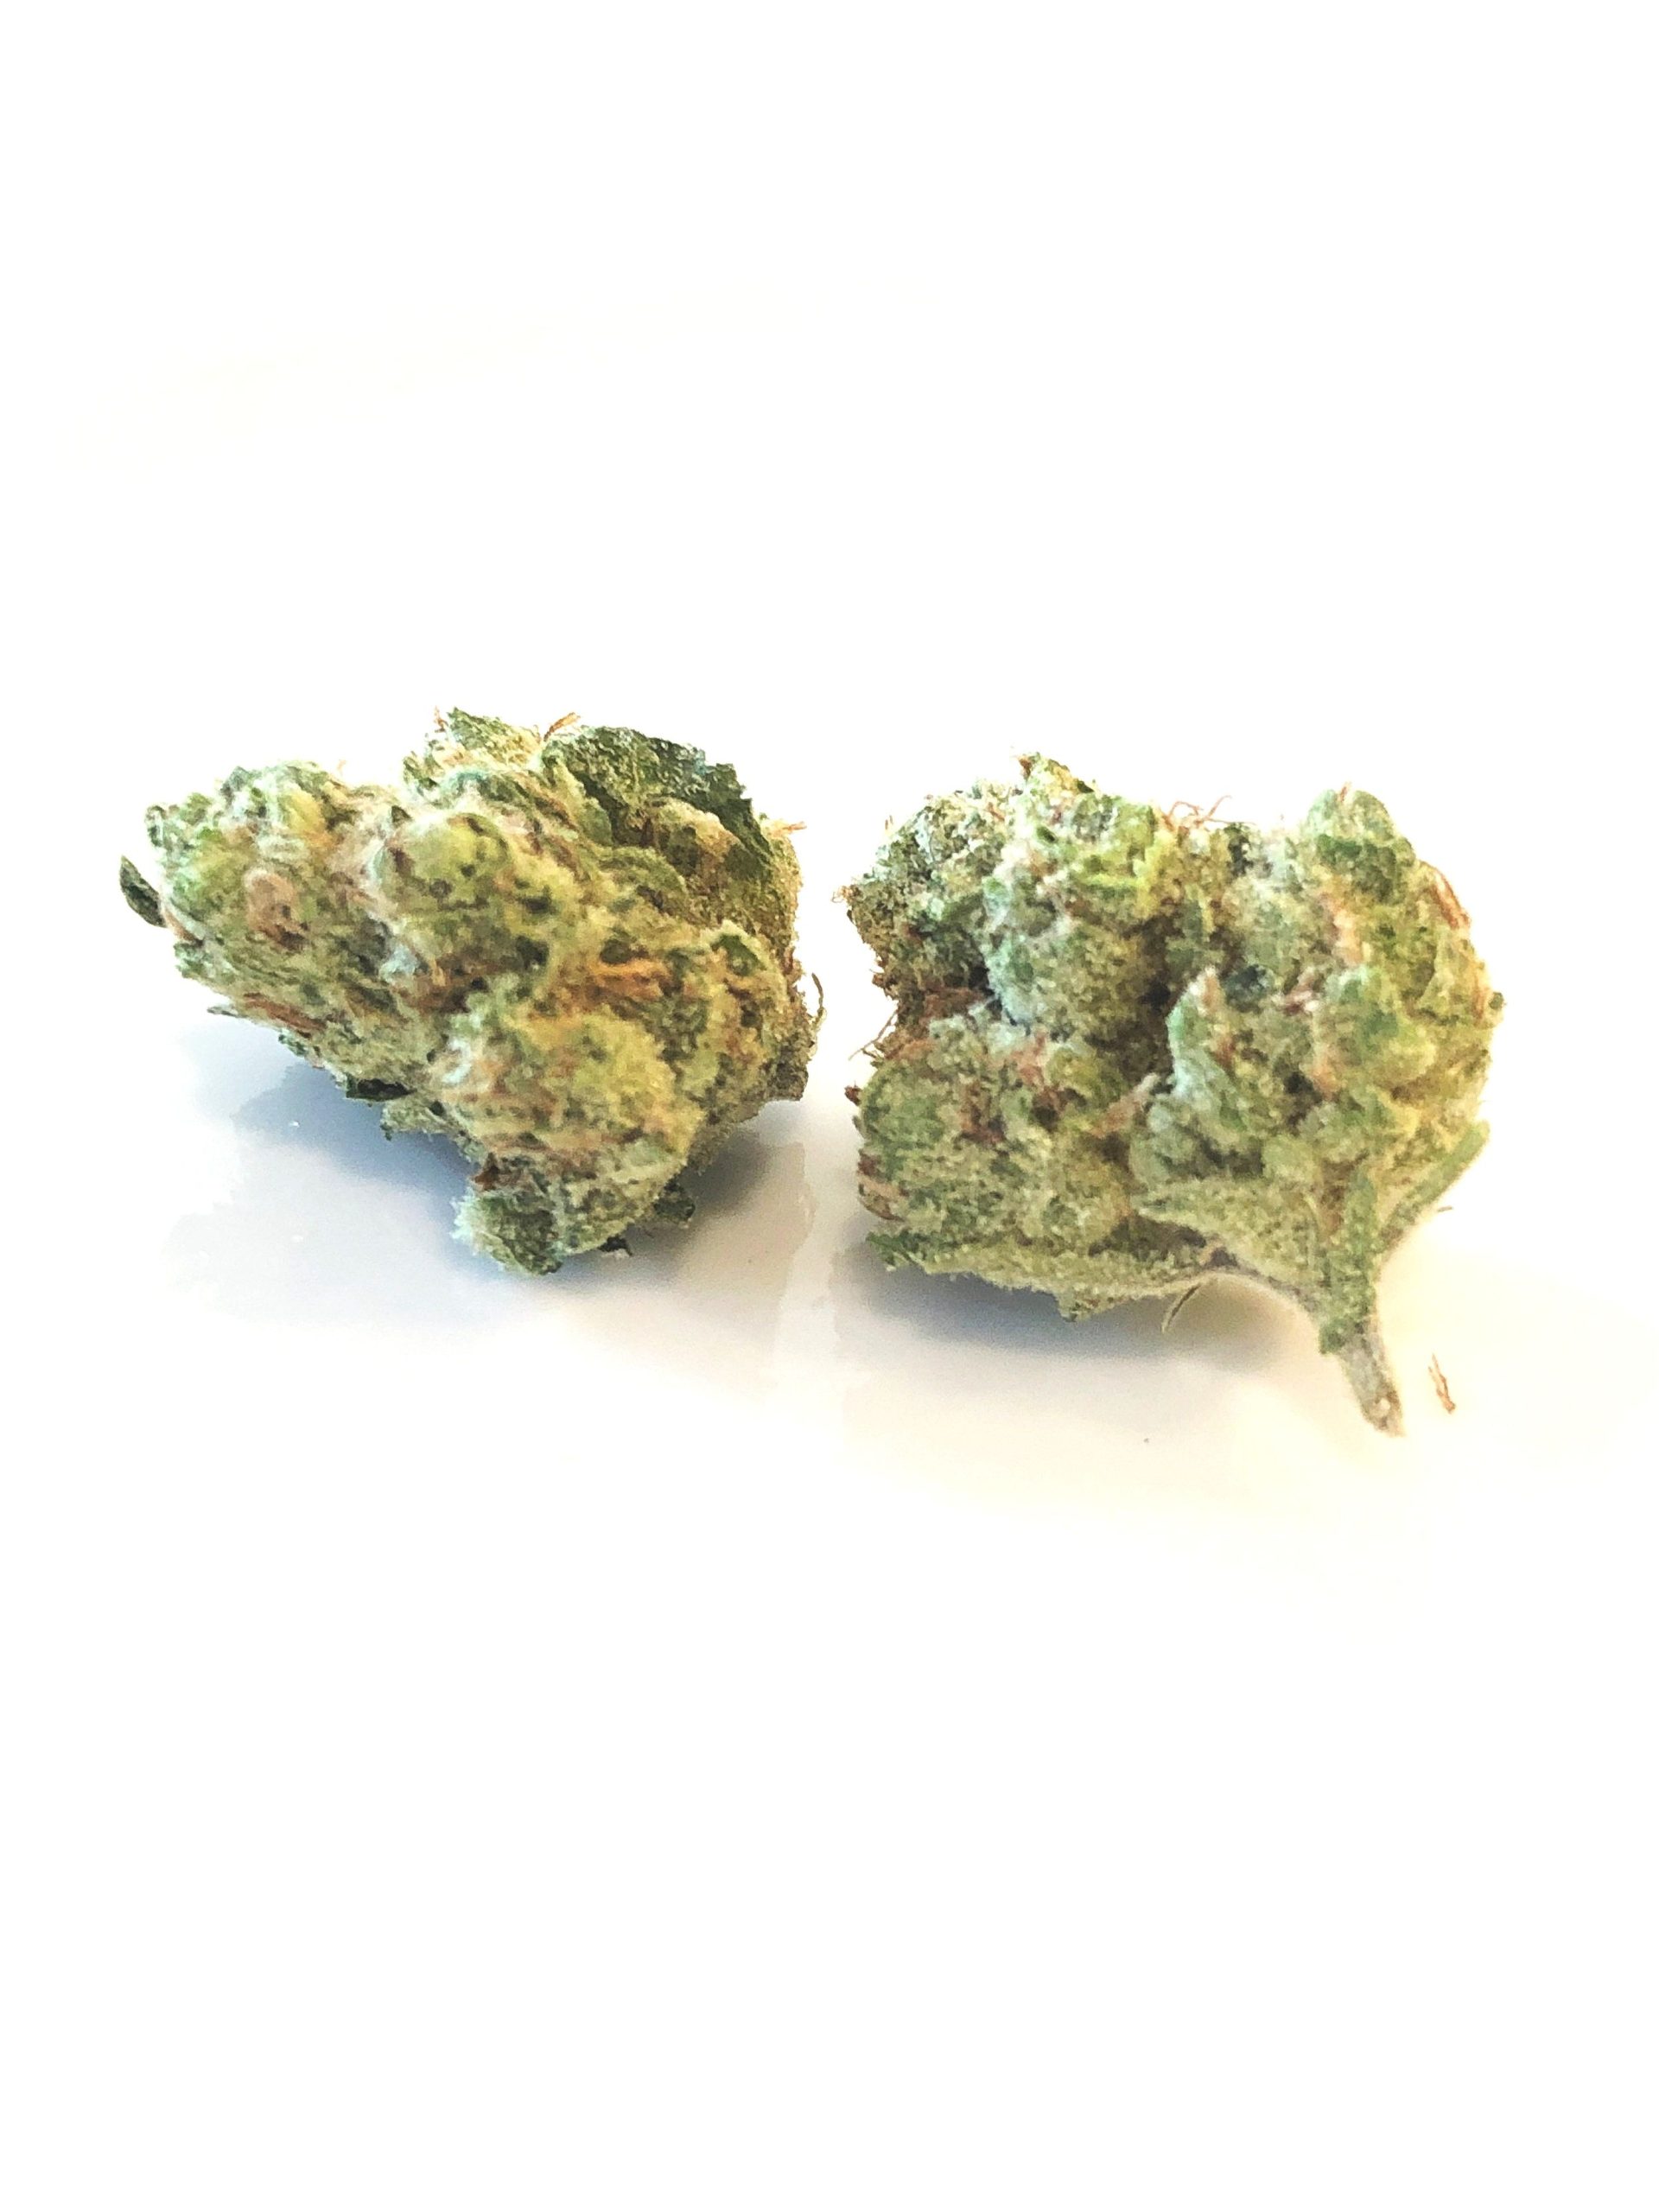 Shop Smart: Tips for Buying Weed Online in Canada post thumbnail image